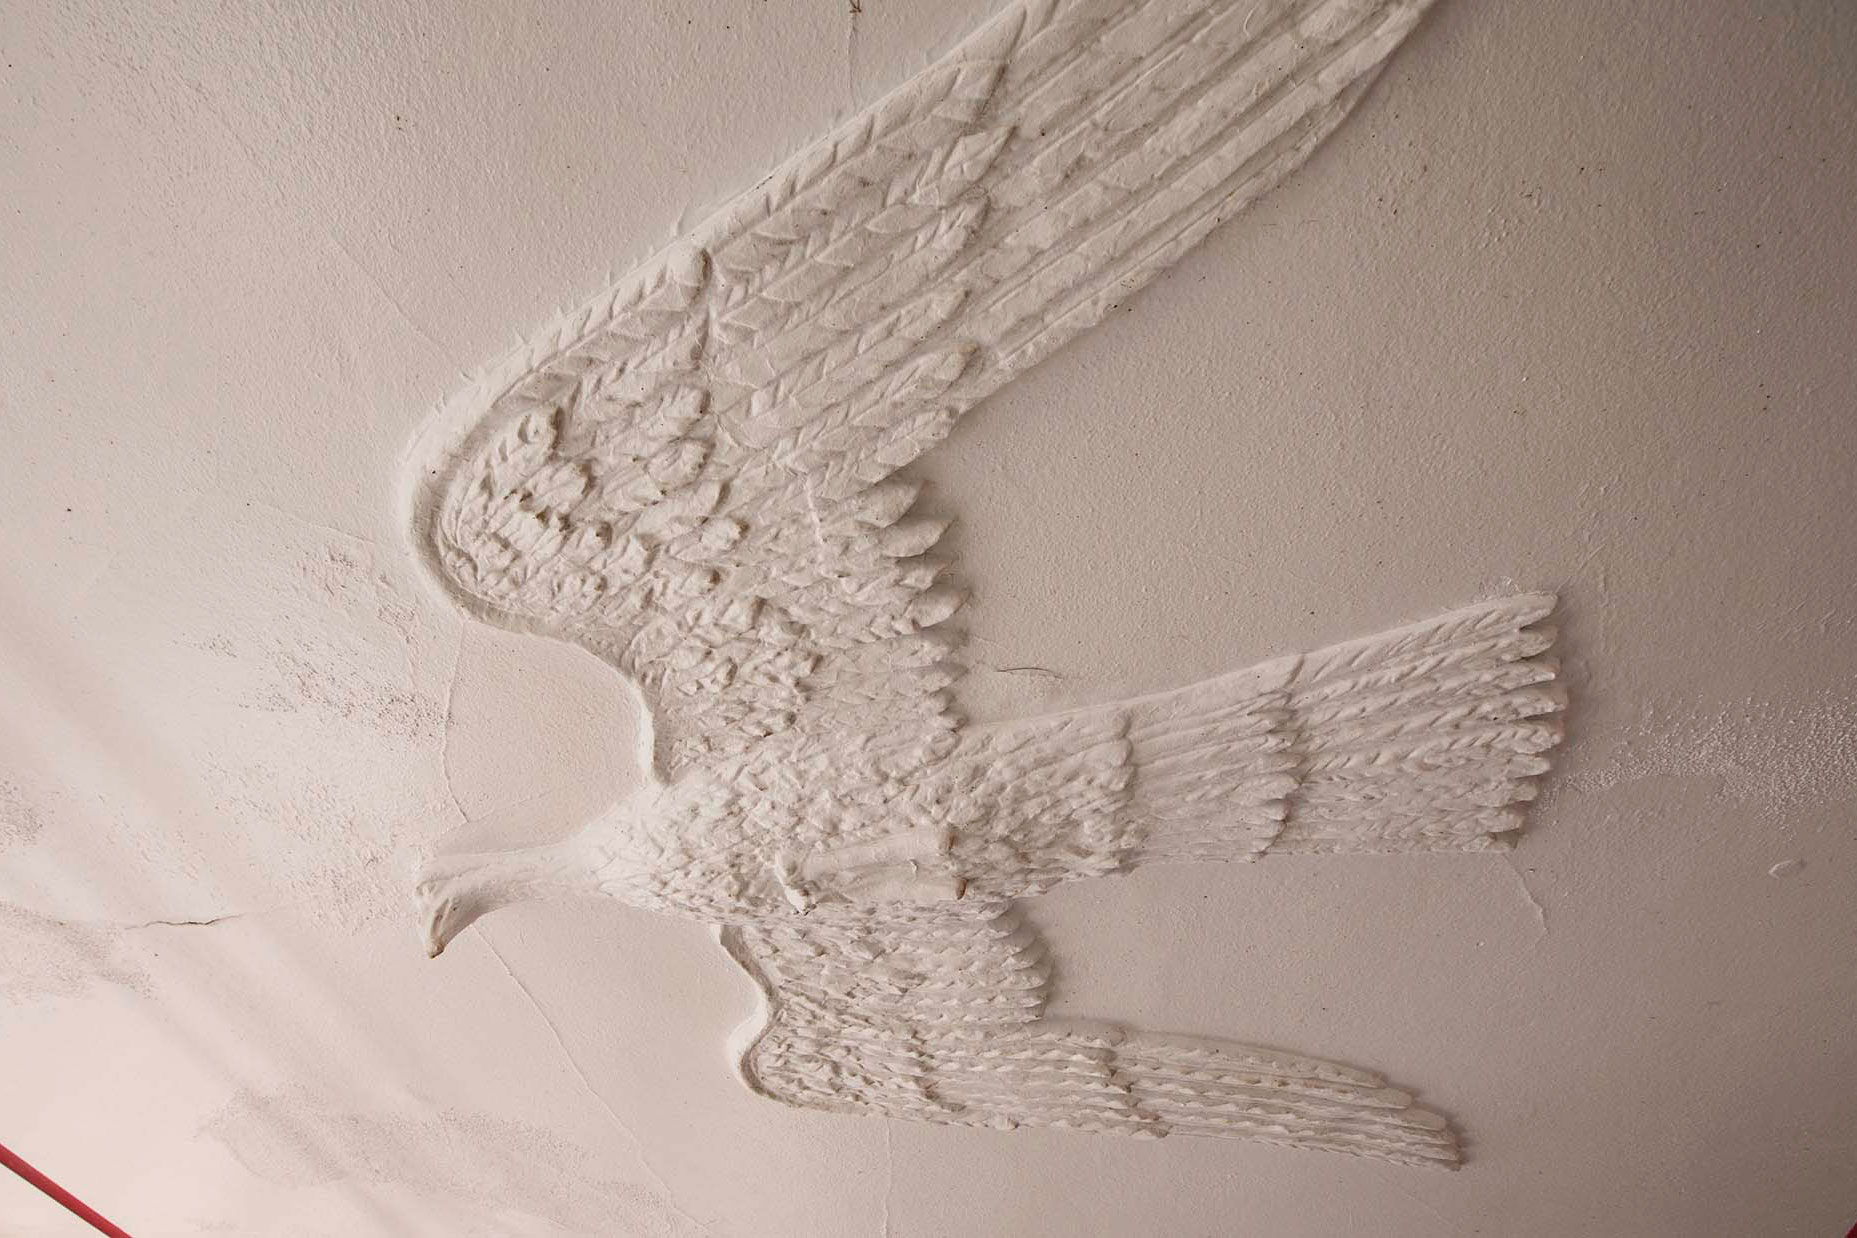 An eagle built coming out of the Rotunda ceiling